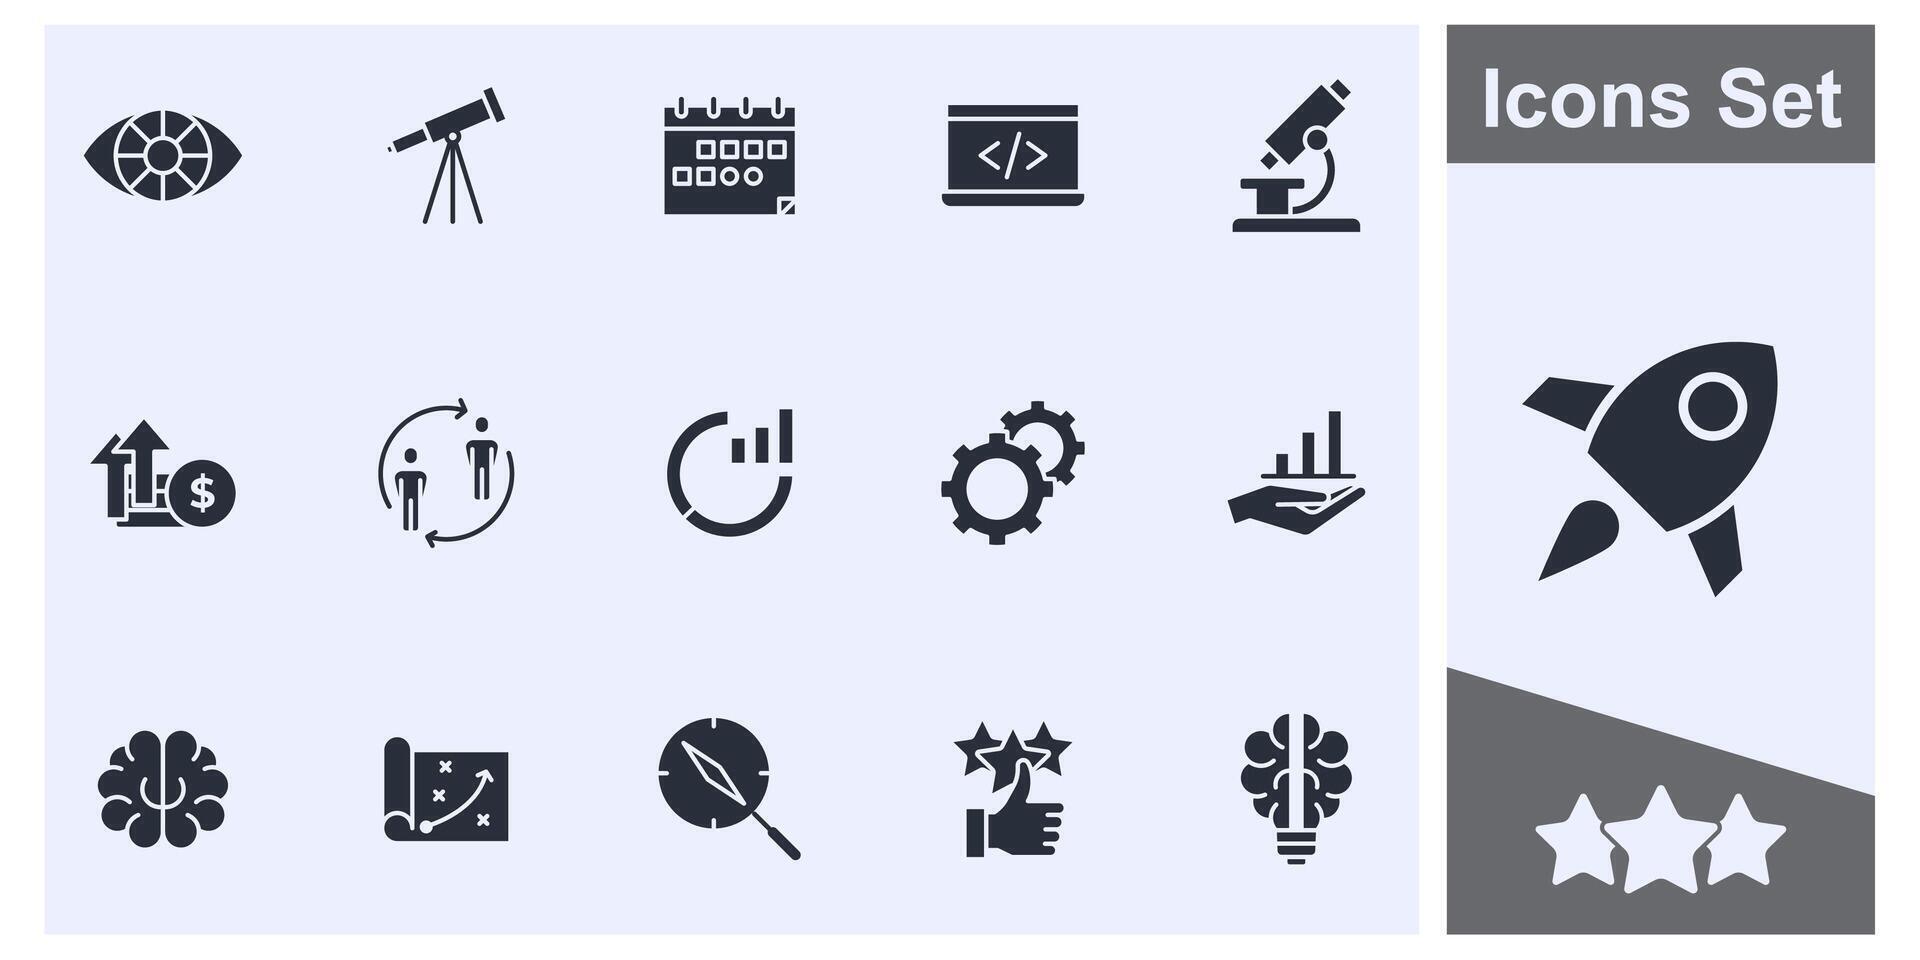 Startup business idea icon set symbol collection, logo isolated illustration vector